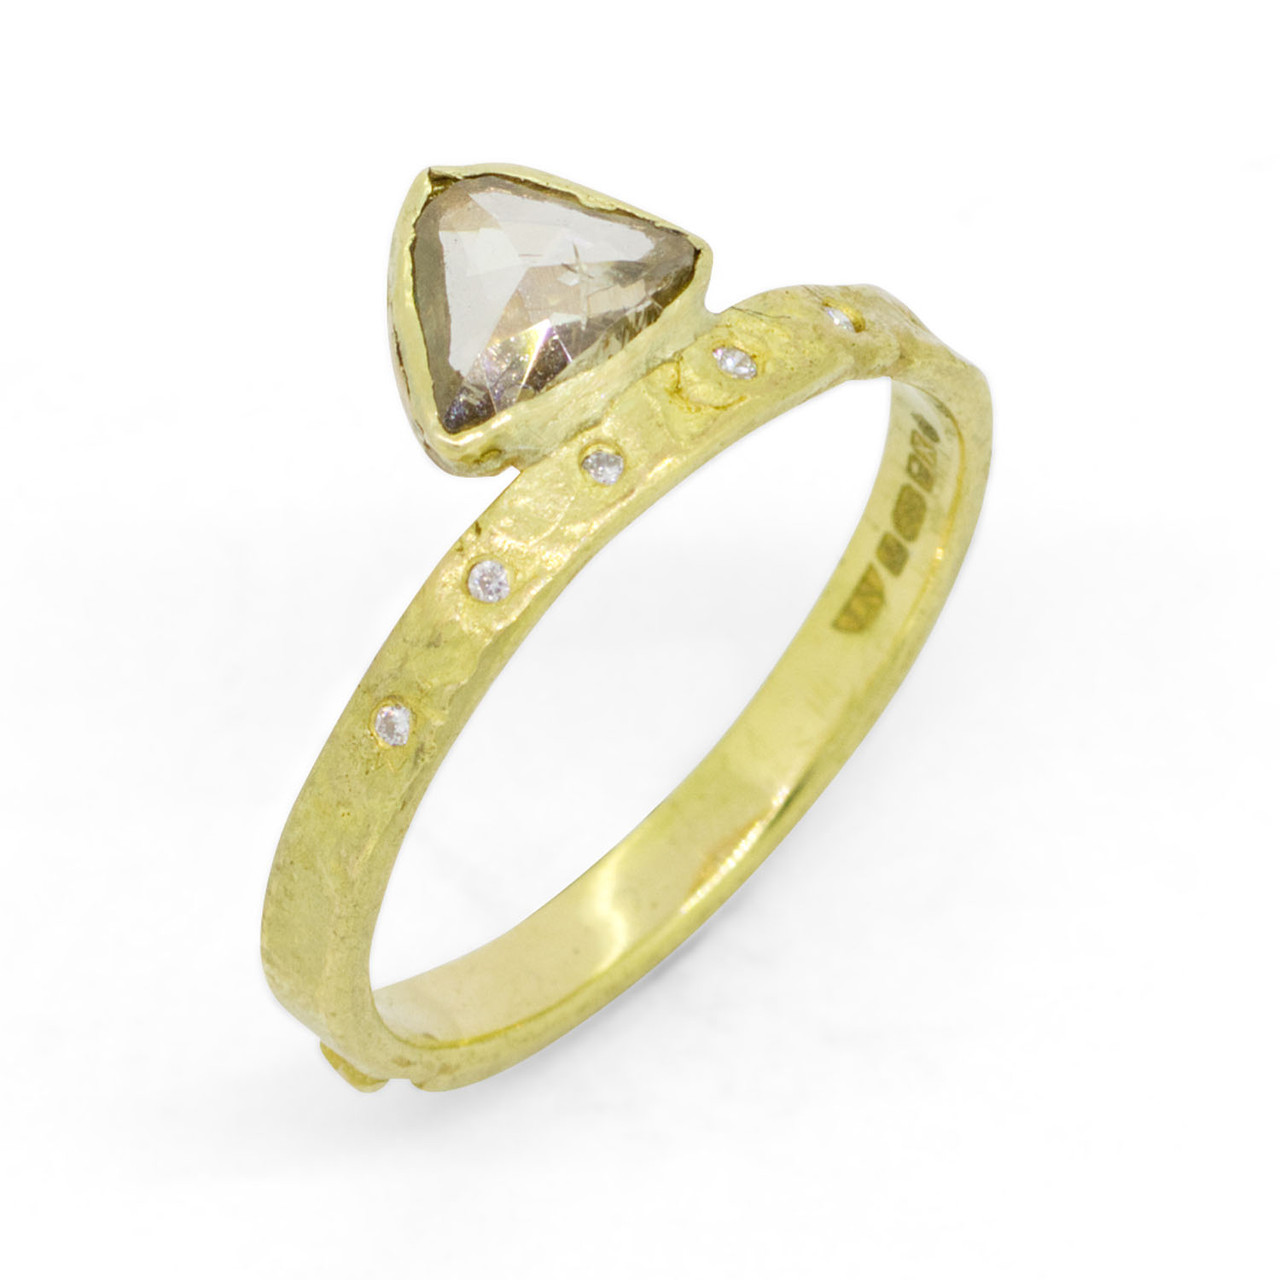 One-Of-A-Kind Molten Triangular Diamond Ring, Laura Ngyou, tomfoolery